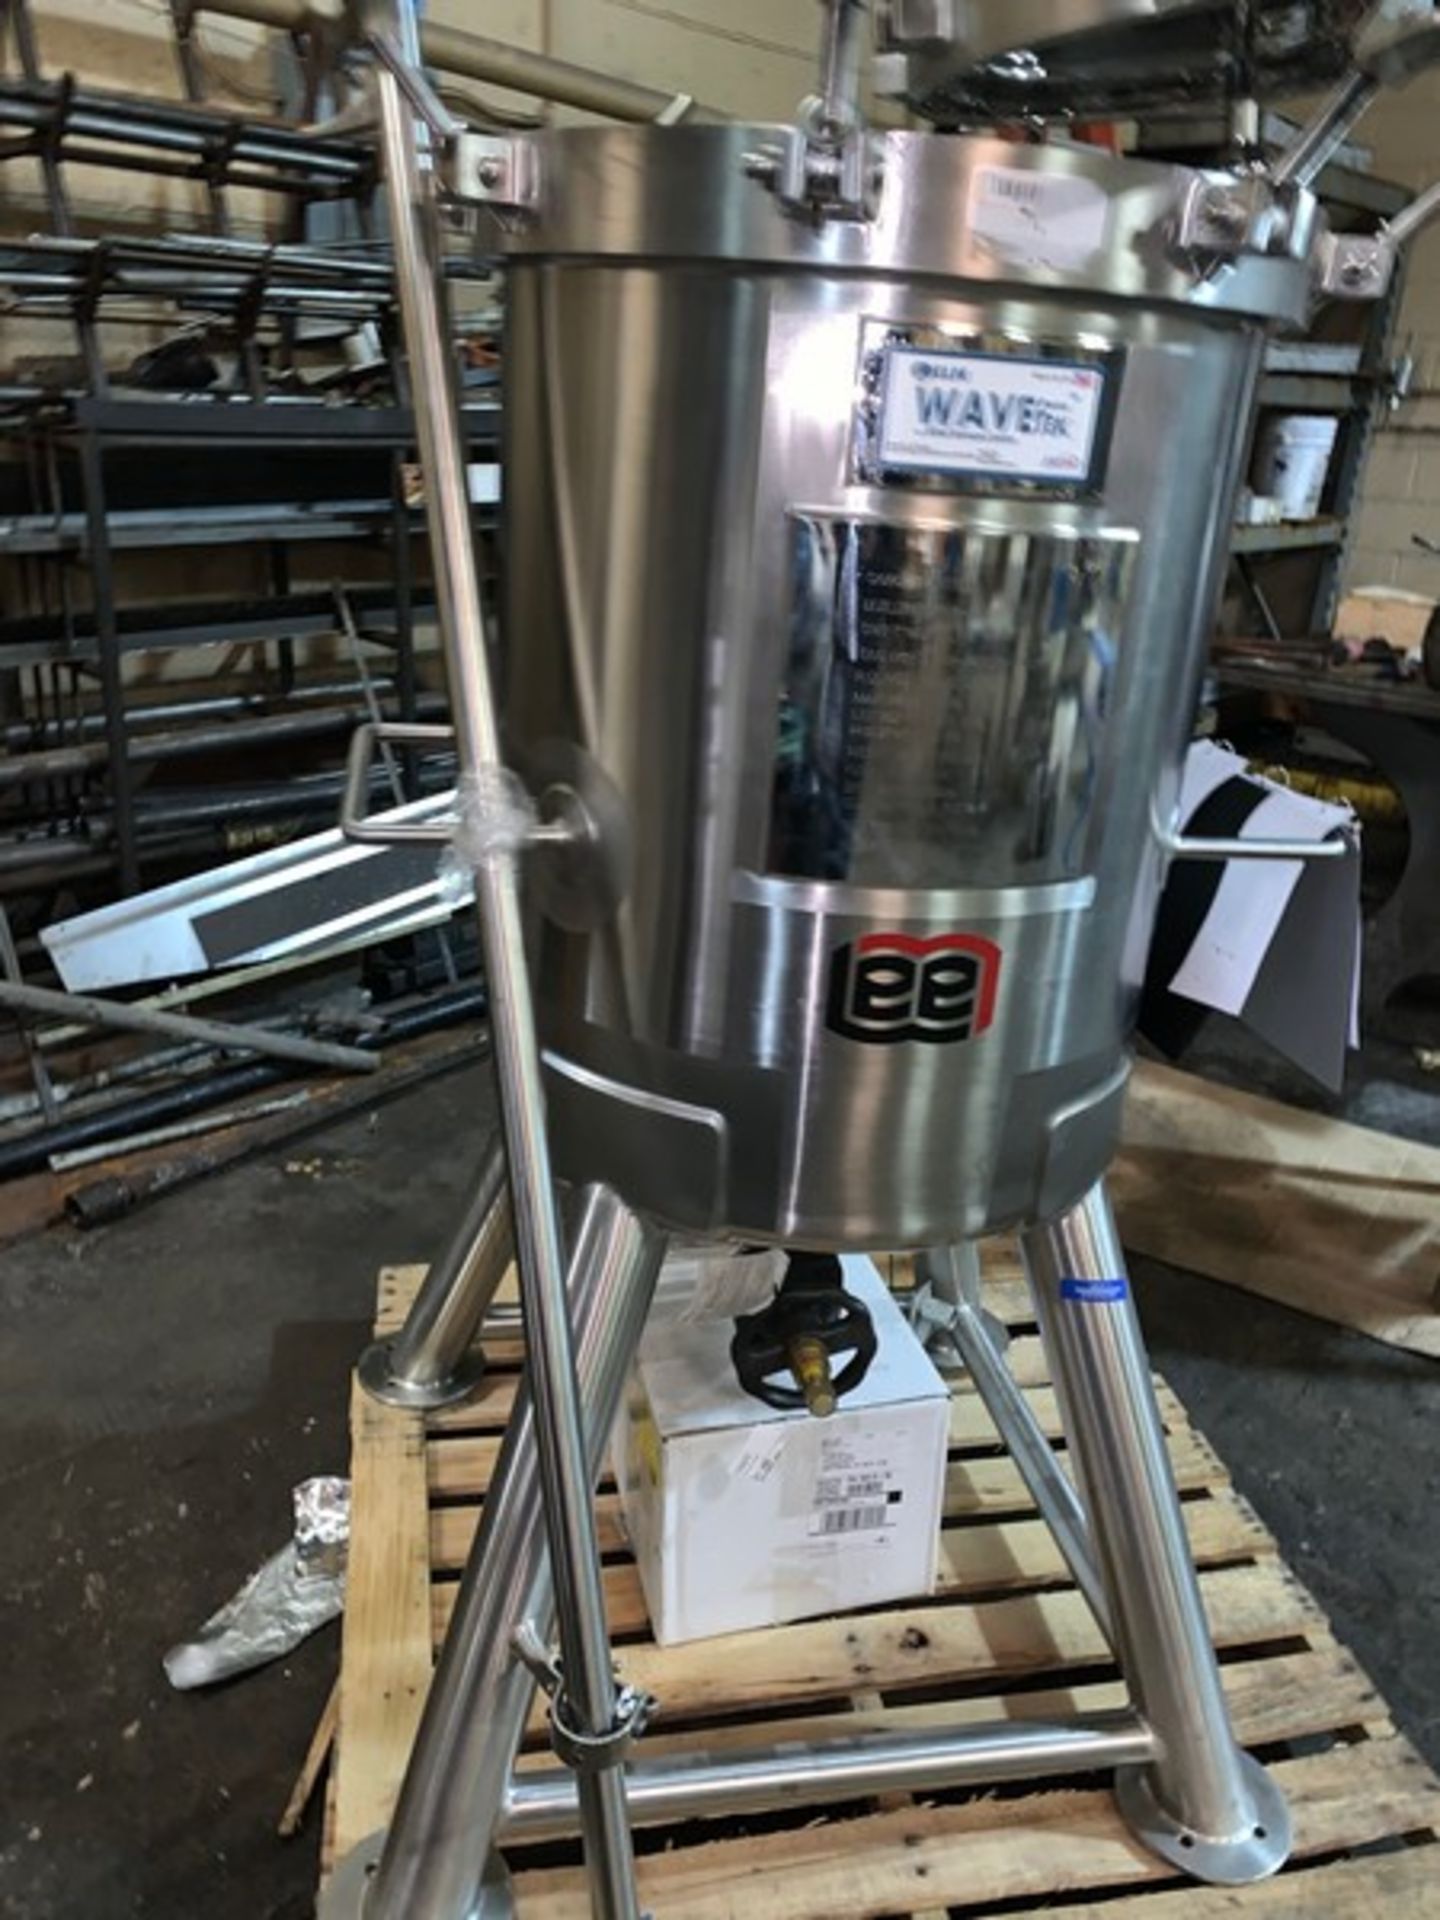 Lee Kettle, Never Used Stainless Steel 316L, 150-Liter; Mirror Finish Inside, Working Pressure 150 - Image 4 of 10